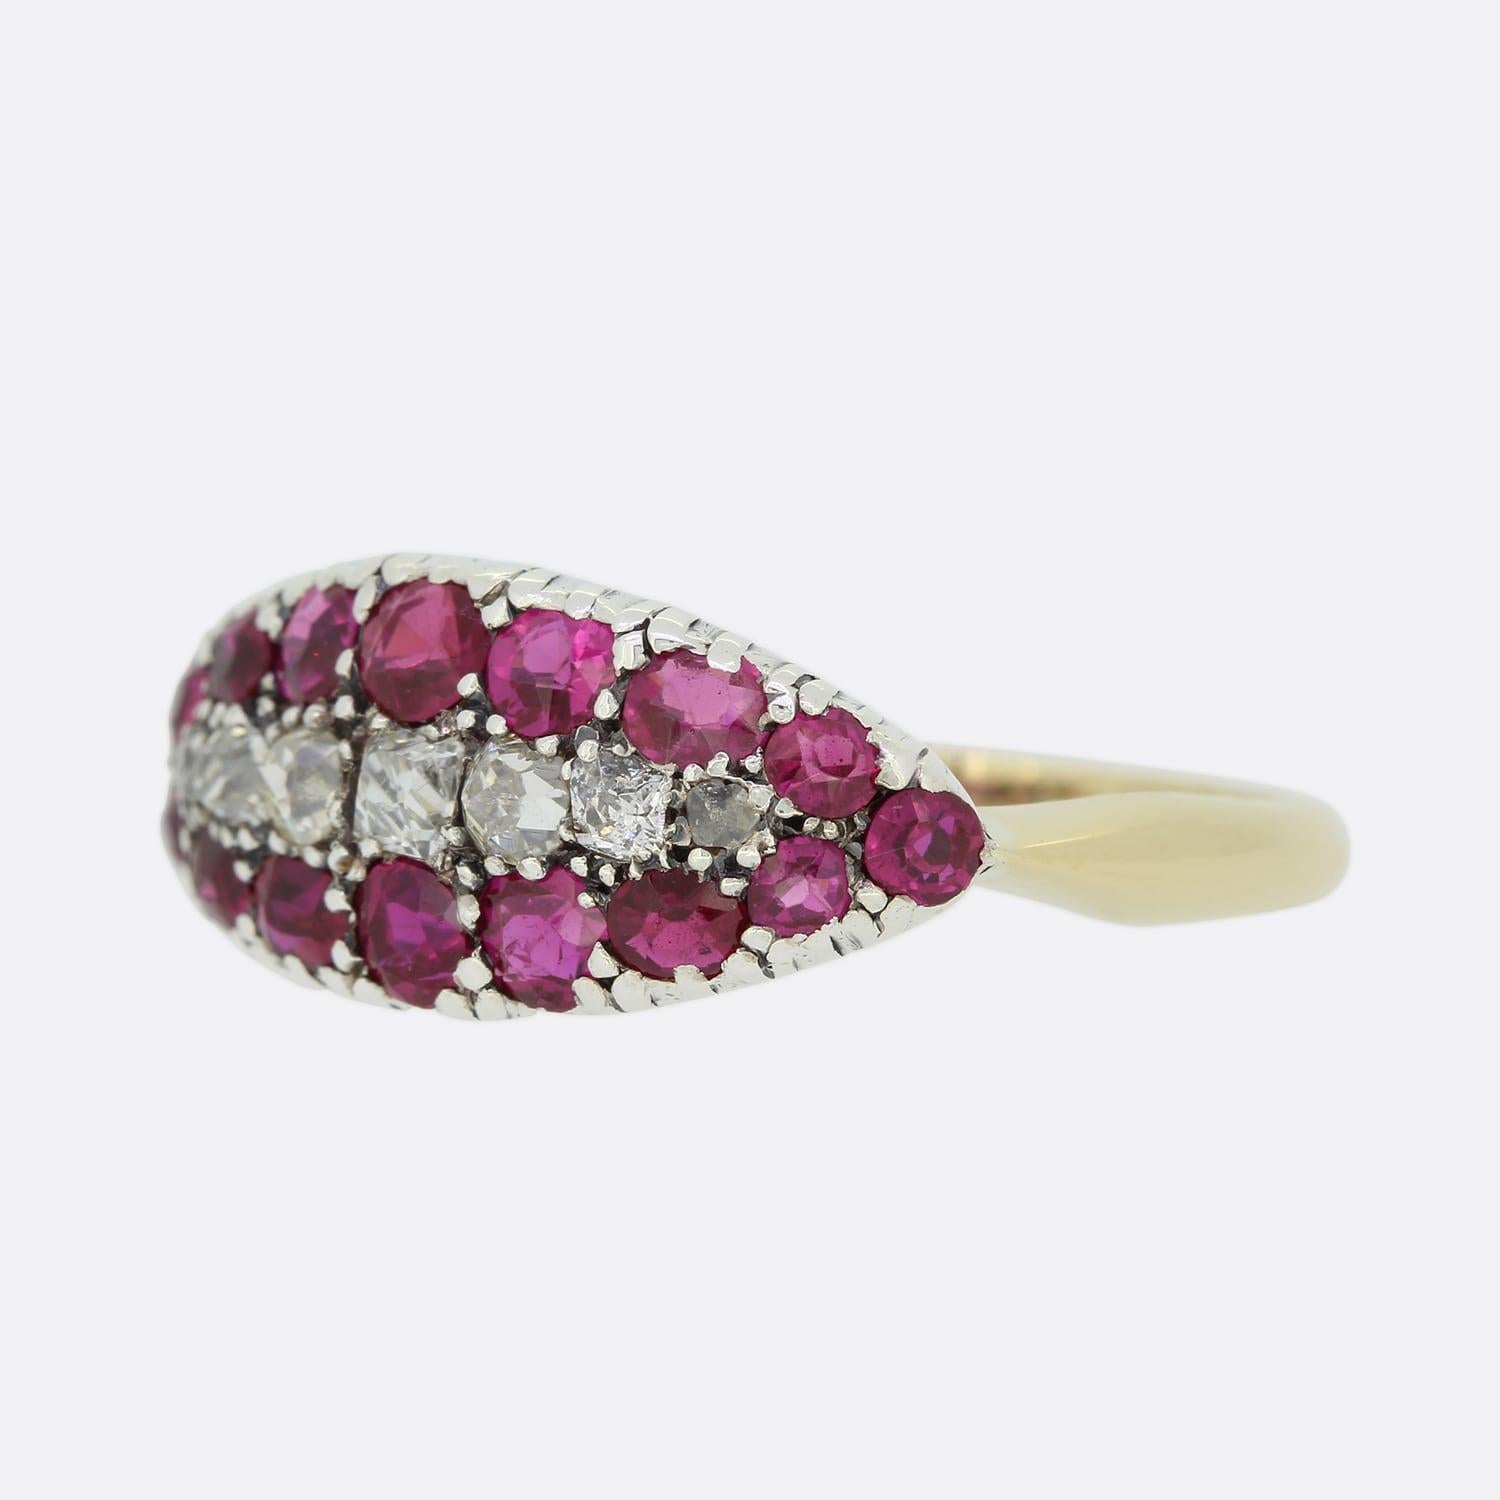 This is a wonderful 18ct yellow gold Victorian ruby and diamond three row band. The ring consists of a central row of old cut diamonds with two outer rows of rubies. The stones rest in simple scalloped claws, the rubies are an intense rich red hue,